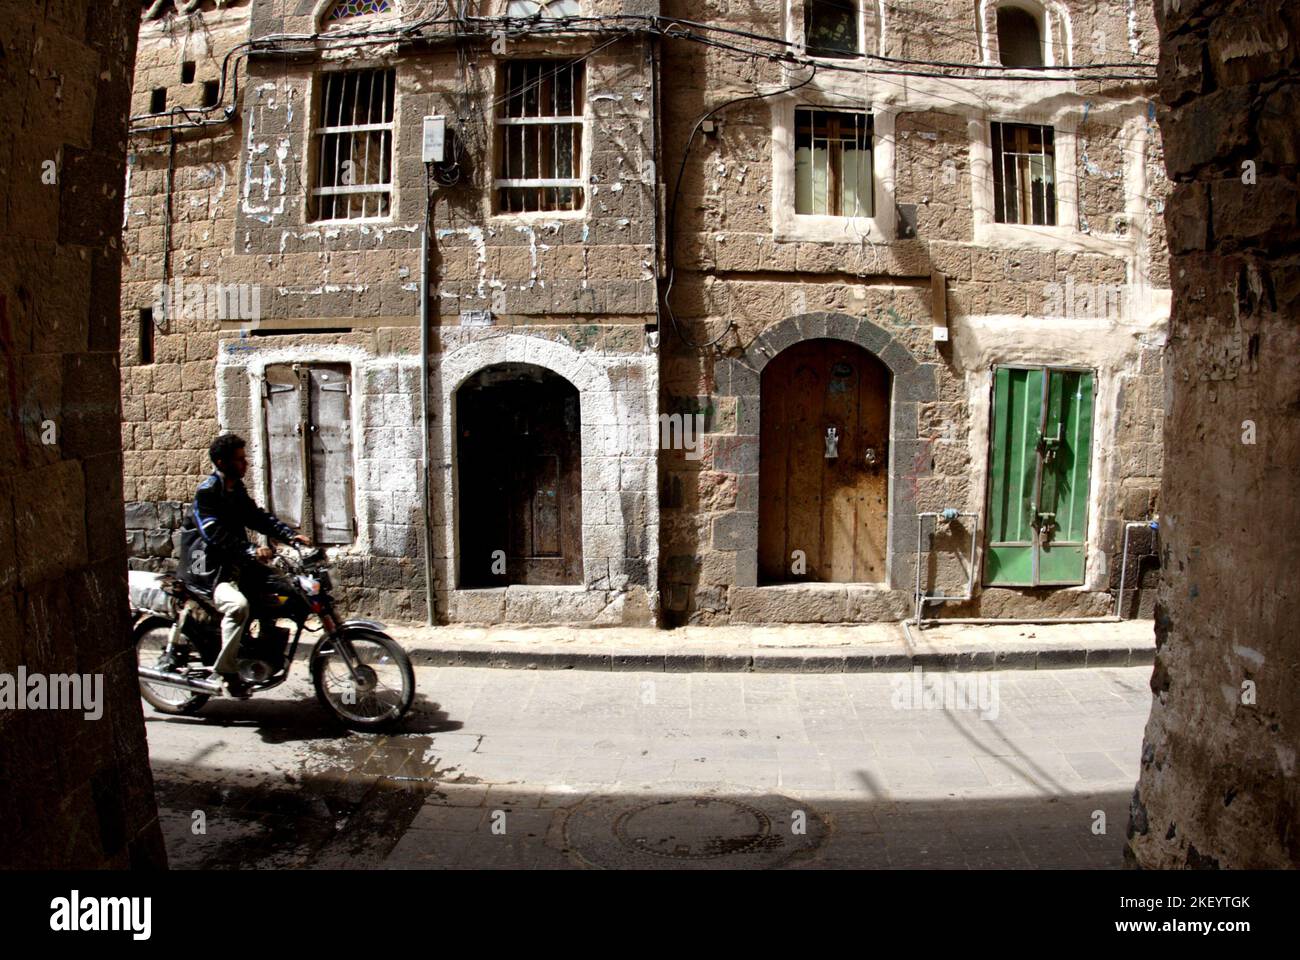 A motorcyclist in alley of the old city, Sana’a, Yemen Stock Photo